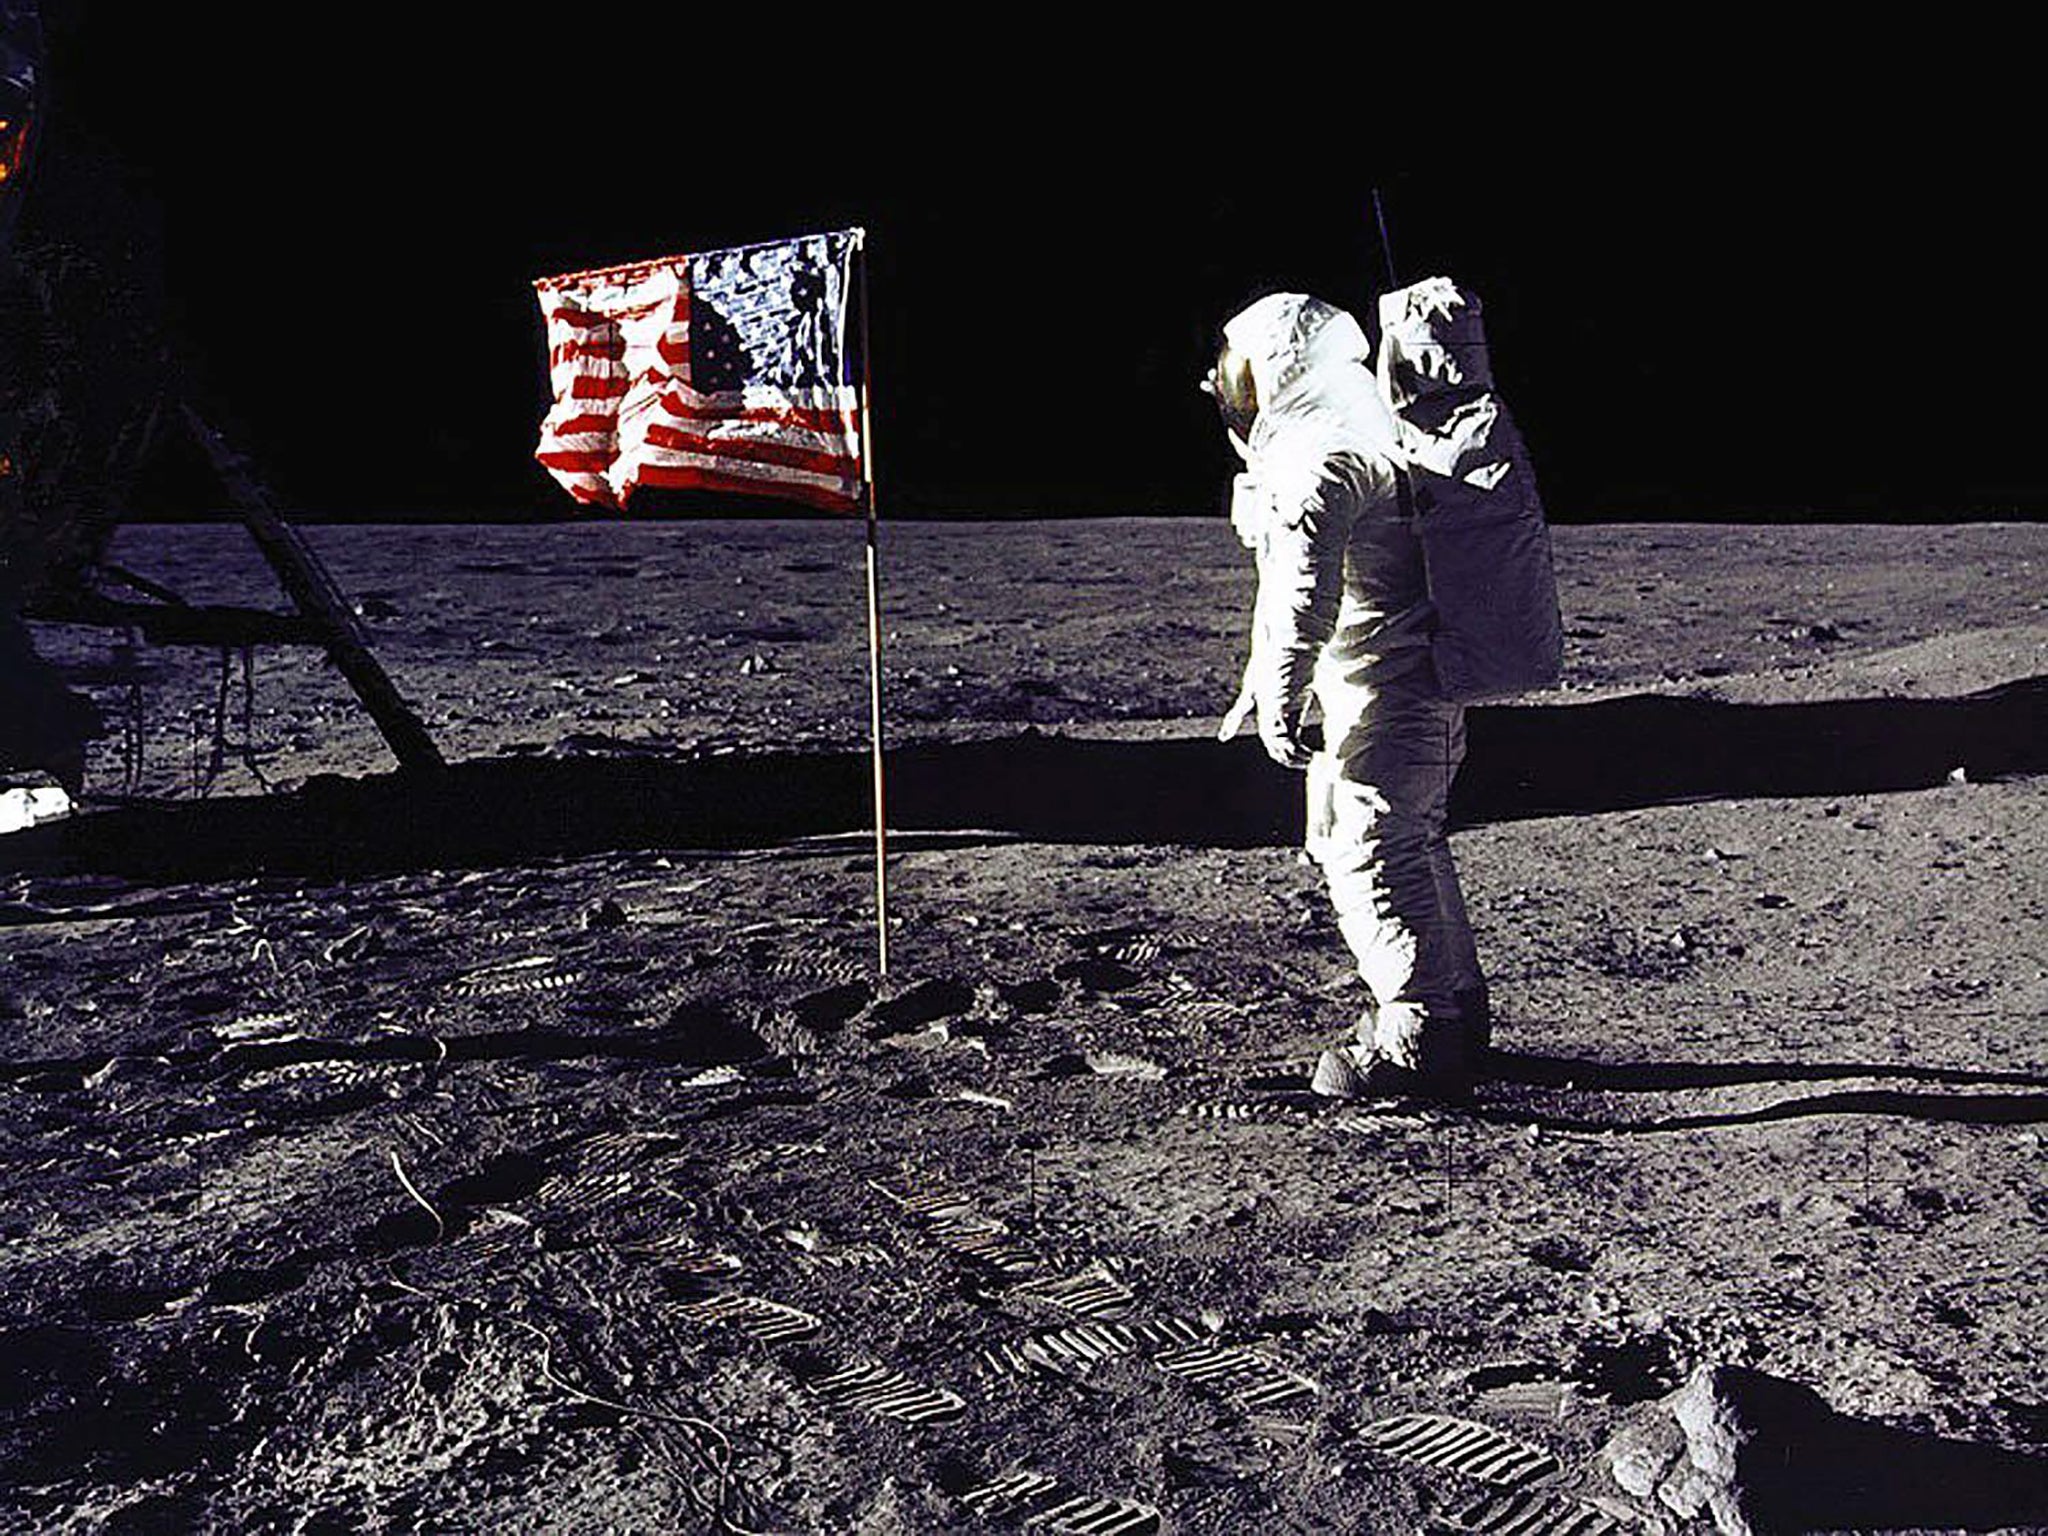 Astronaut Buzz Aldrin saluting the US flag on the surface of the moon during the Apollo 11 lunar mission, 1969